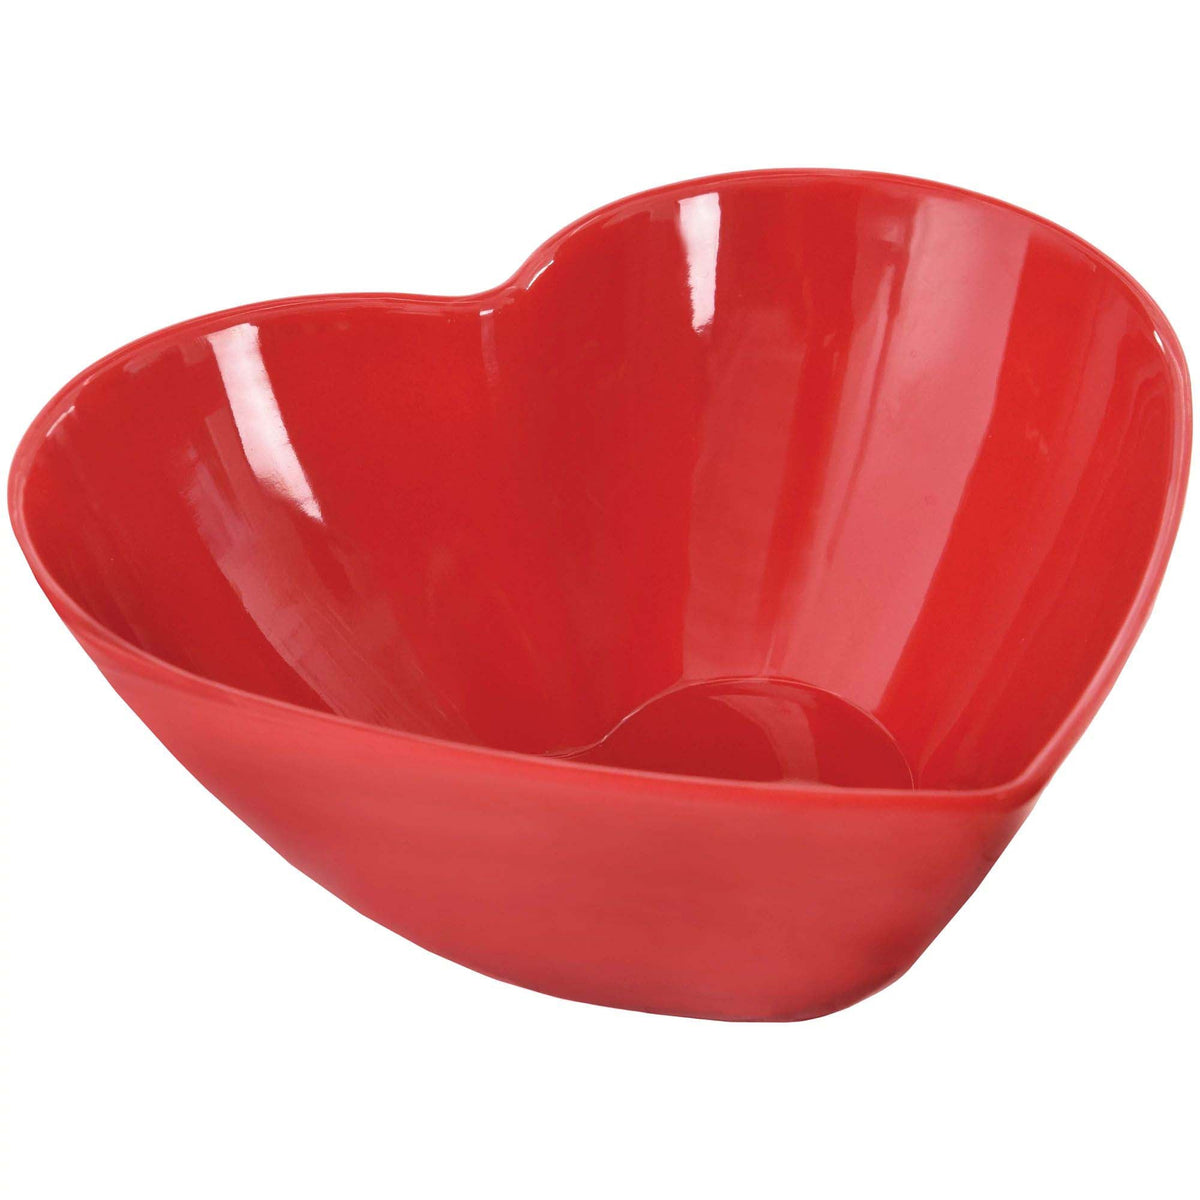 AMSCAN CA Valentine's Day Red Heart Shaped Bowl, 7 Inches, 1 Count 192937364925